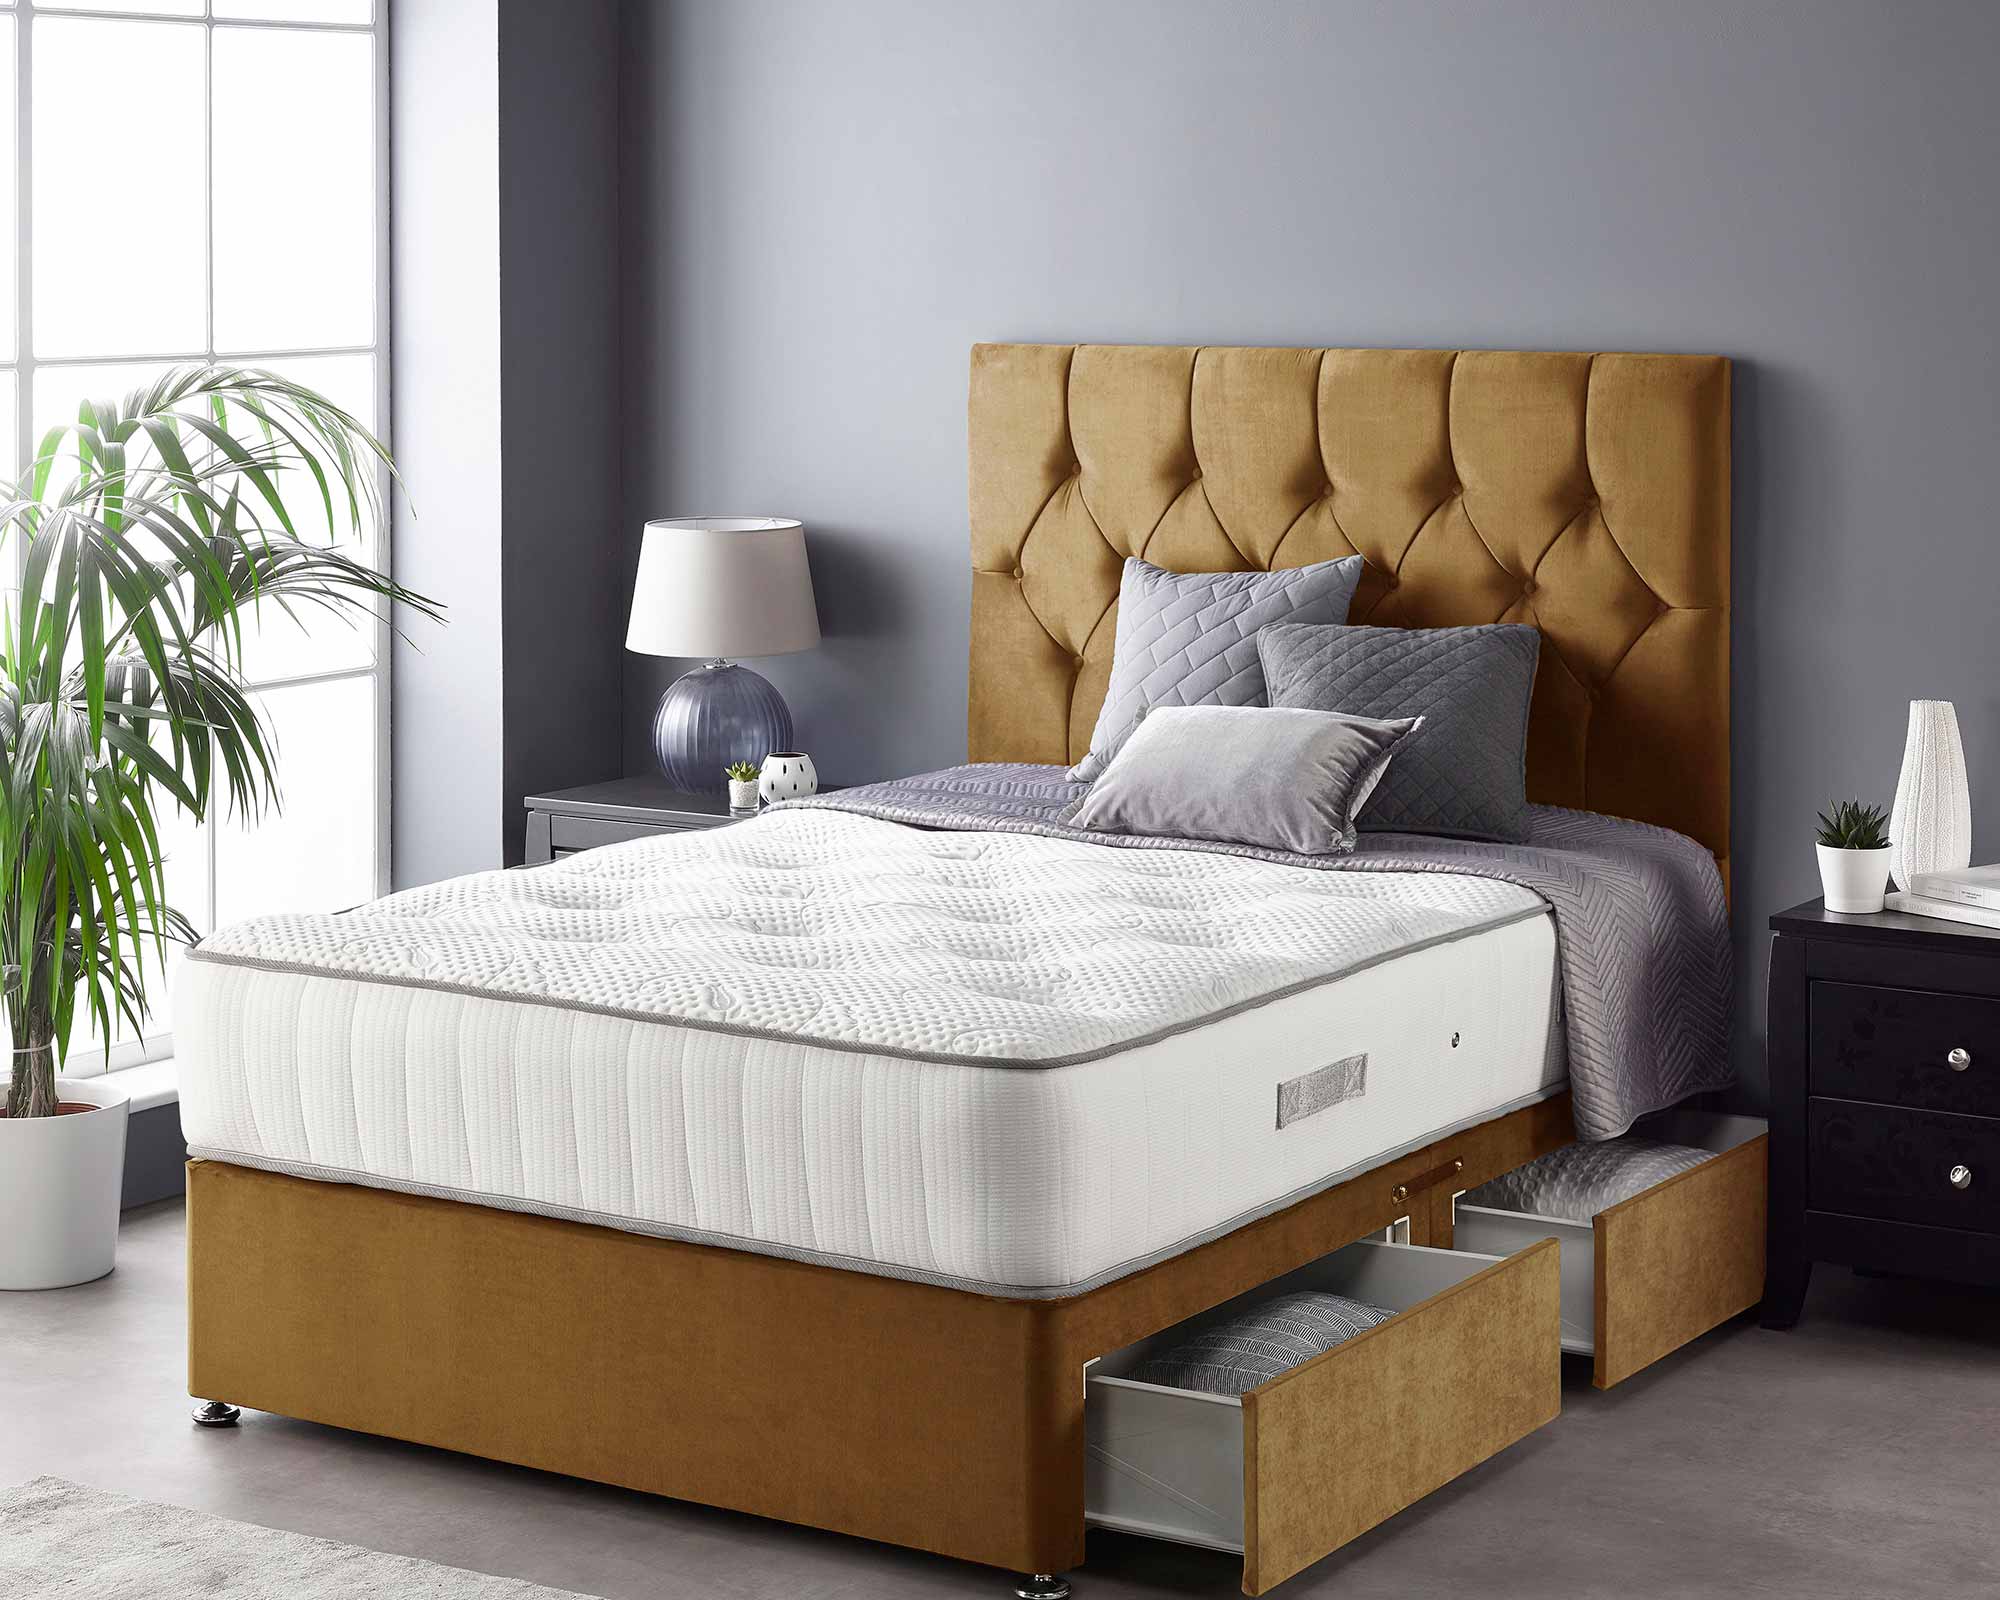 Catherine-Lansfield-Boutique-Divan-Base-and-Headboard-with-Free-Natural-Cashmere-Mattress-Ochre-Side.jpg